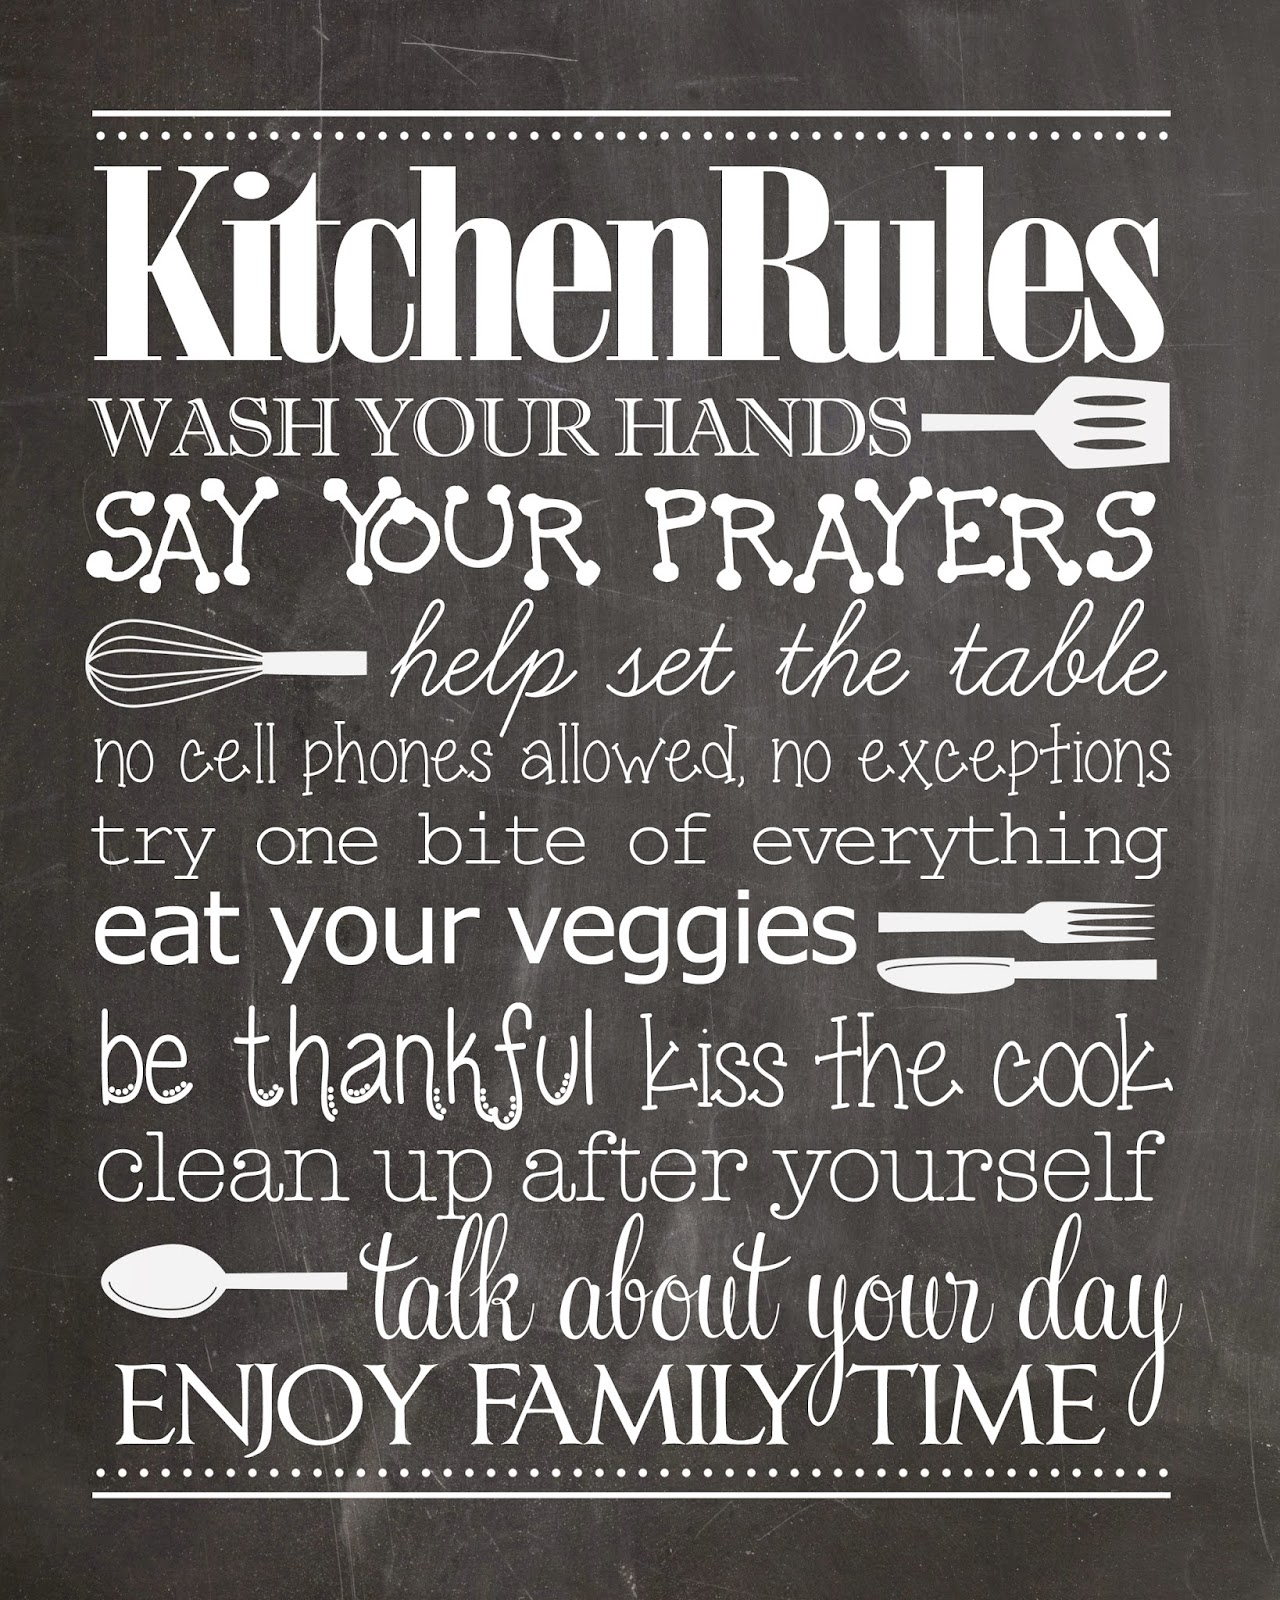 Best FREE Printables for your Kitchen. So cute!